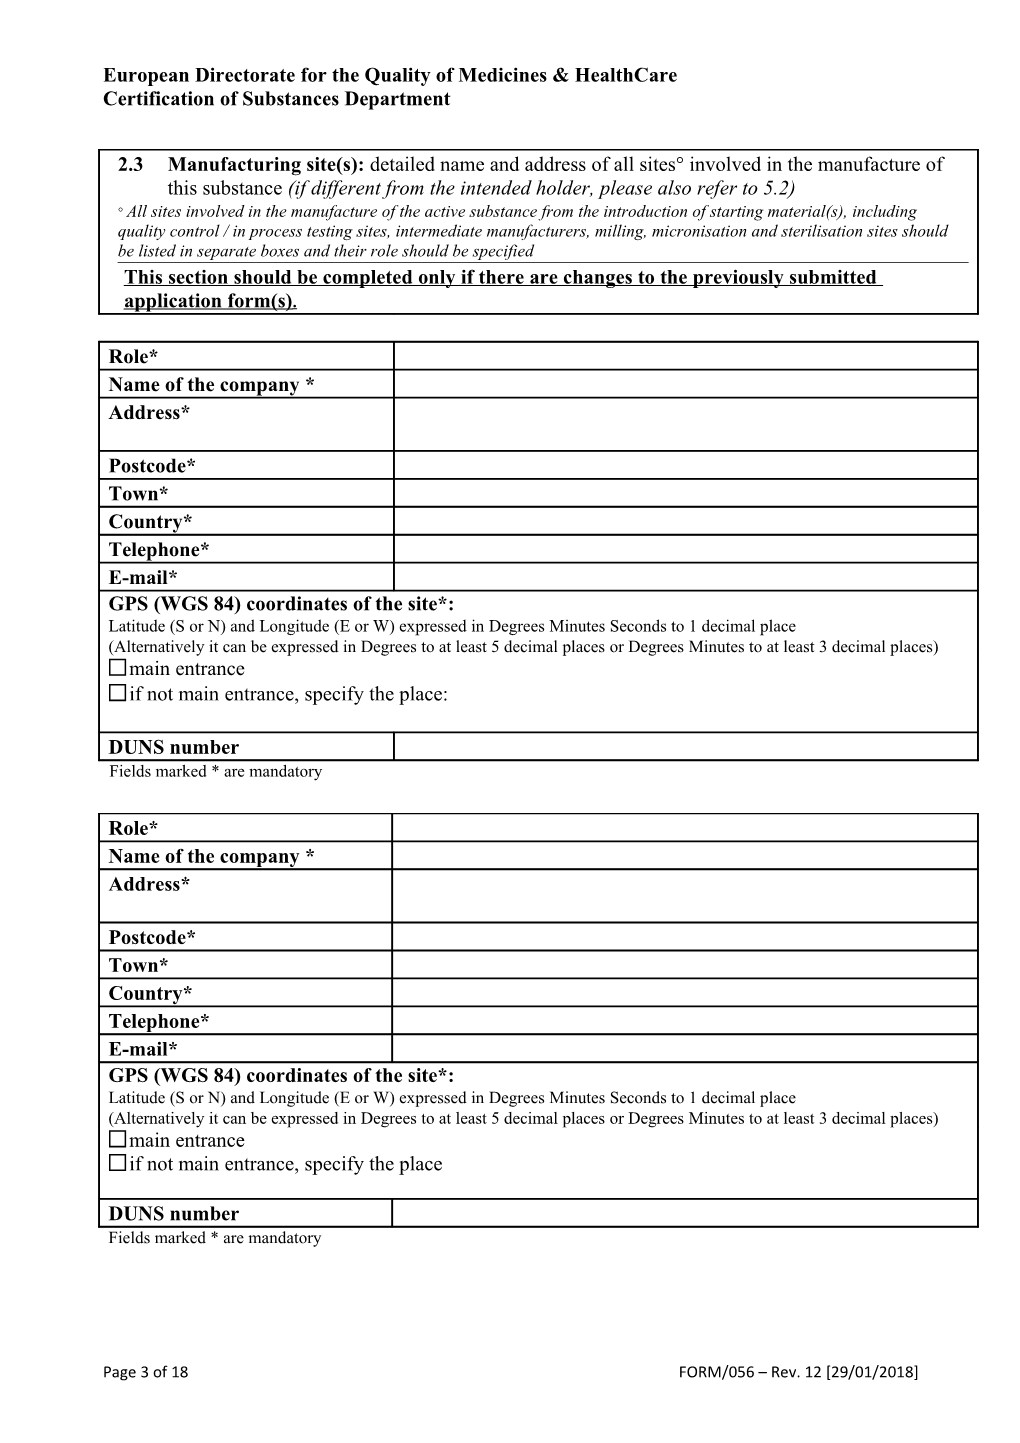 Form to Be Filled in for Each Application for a Certificate of Suitability to the Monographs